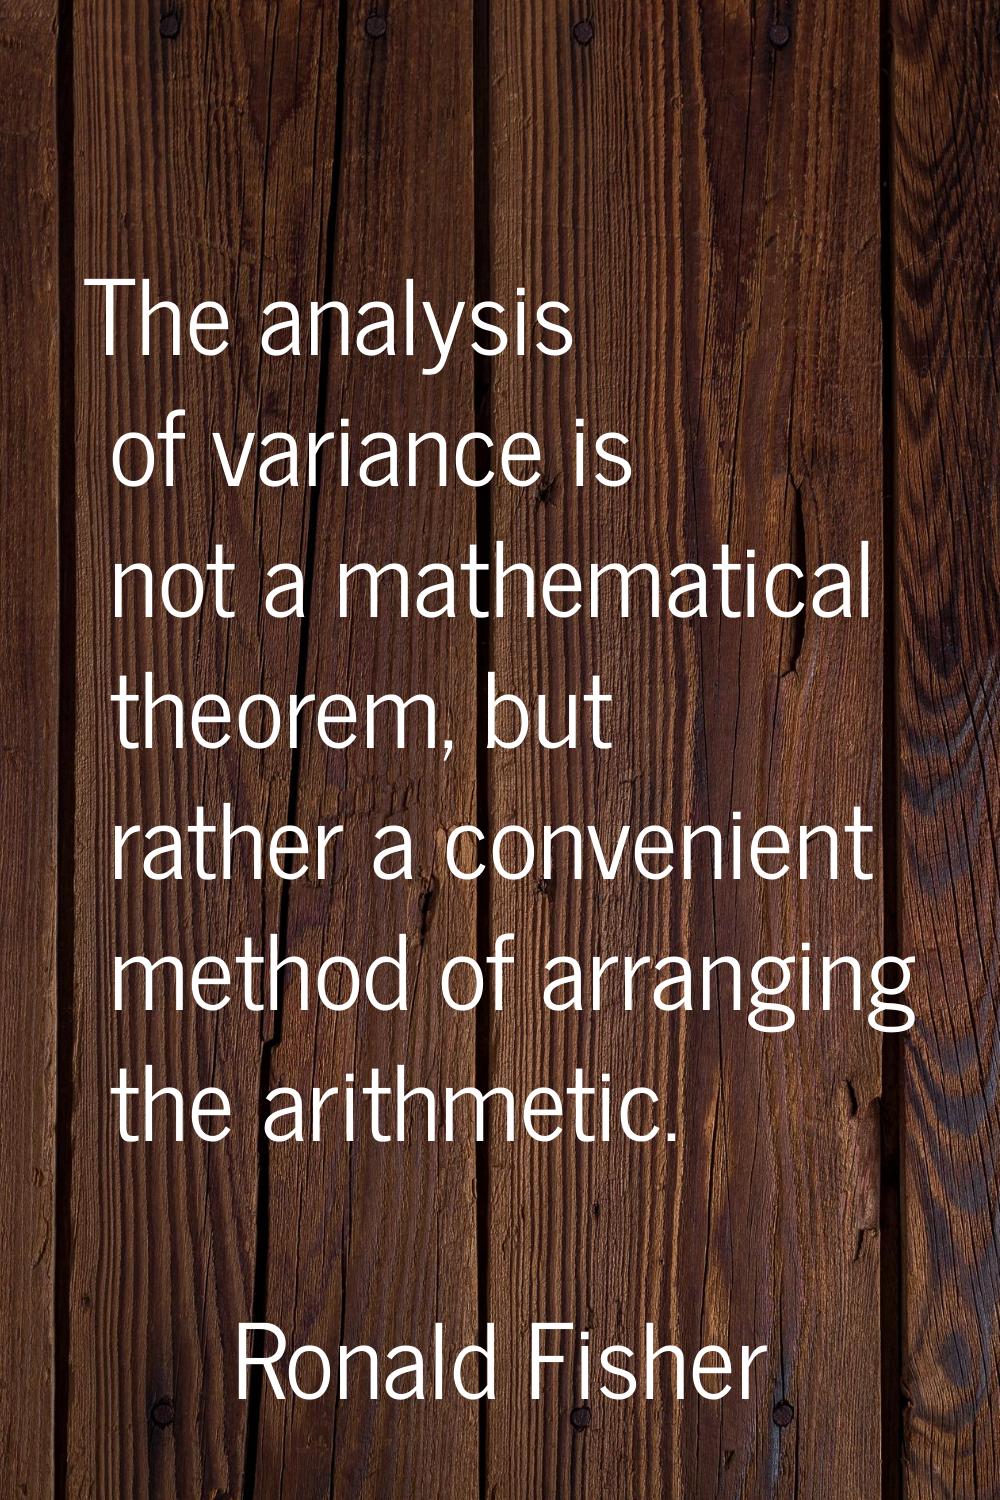 The analysis of variance is not a mathematical theorem, but rather a convenient method of arranging